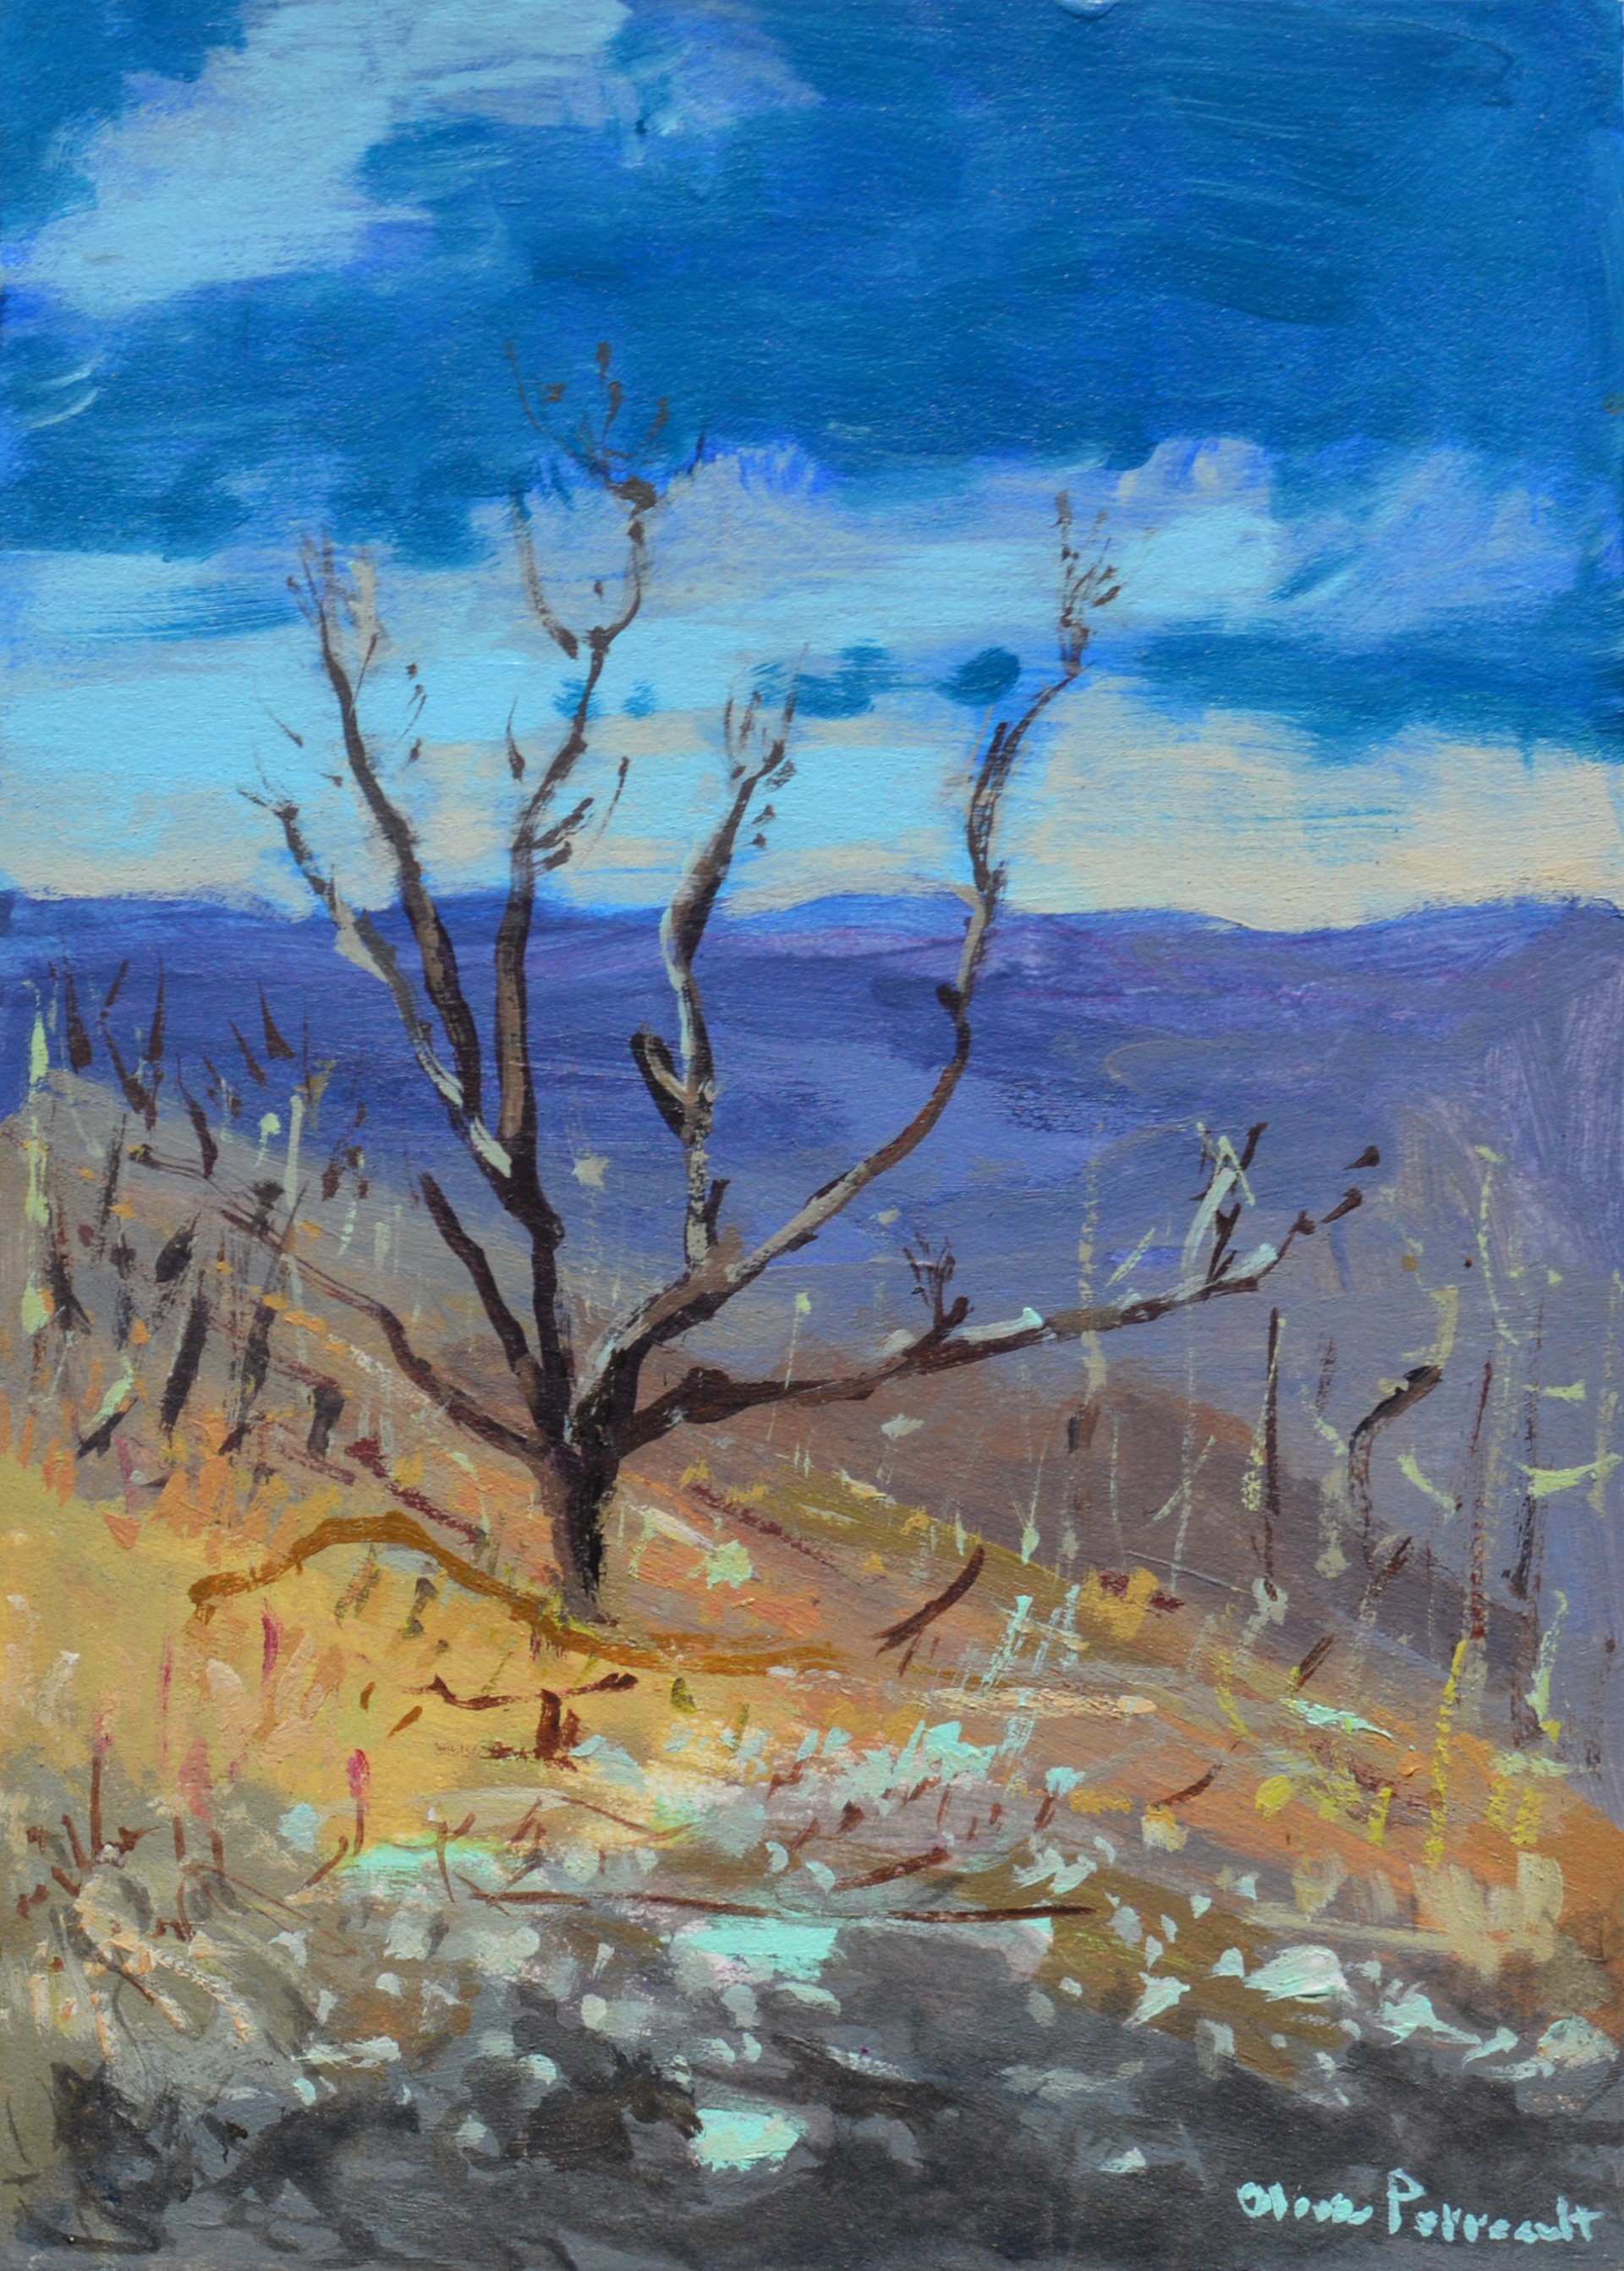 Lone Tree on the Mountain Top by Olivia Perreault